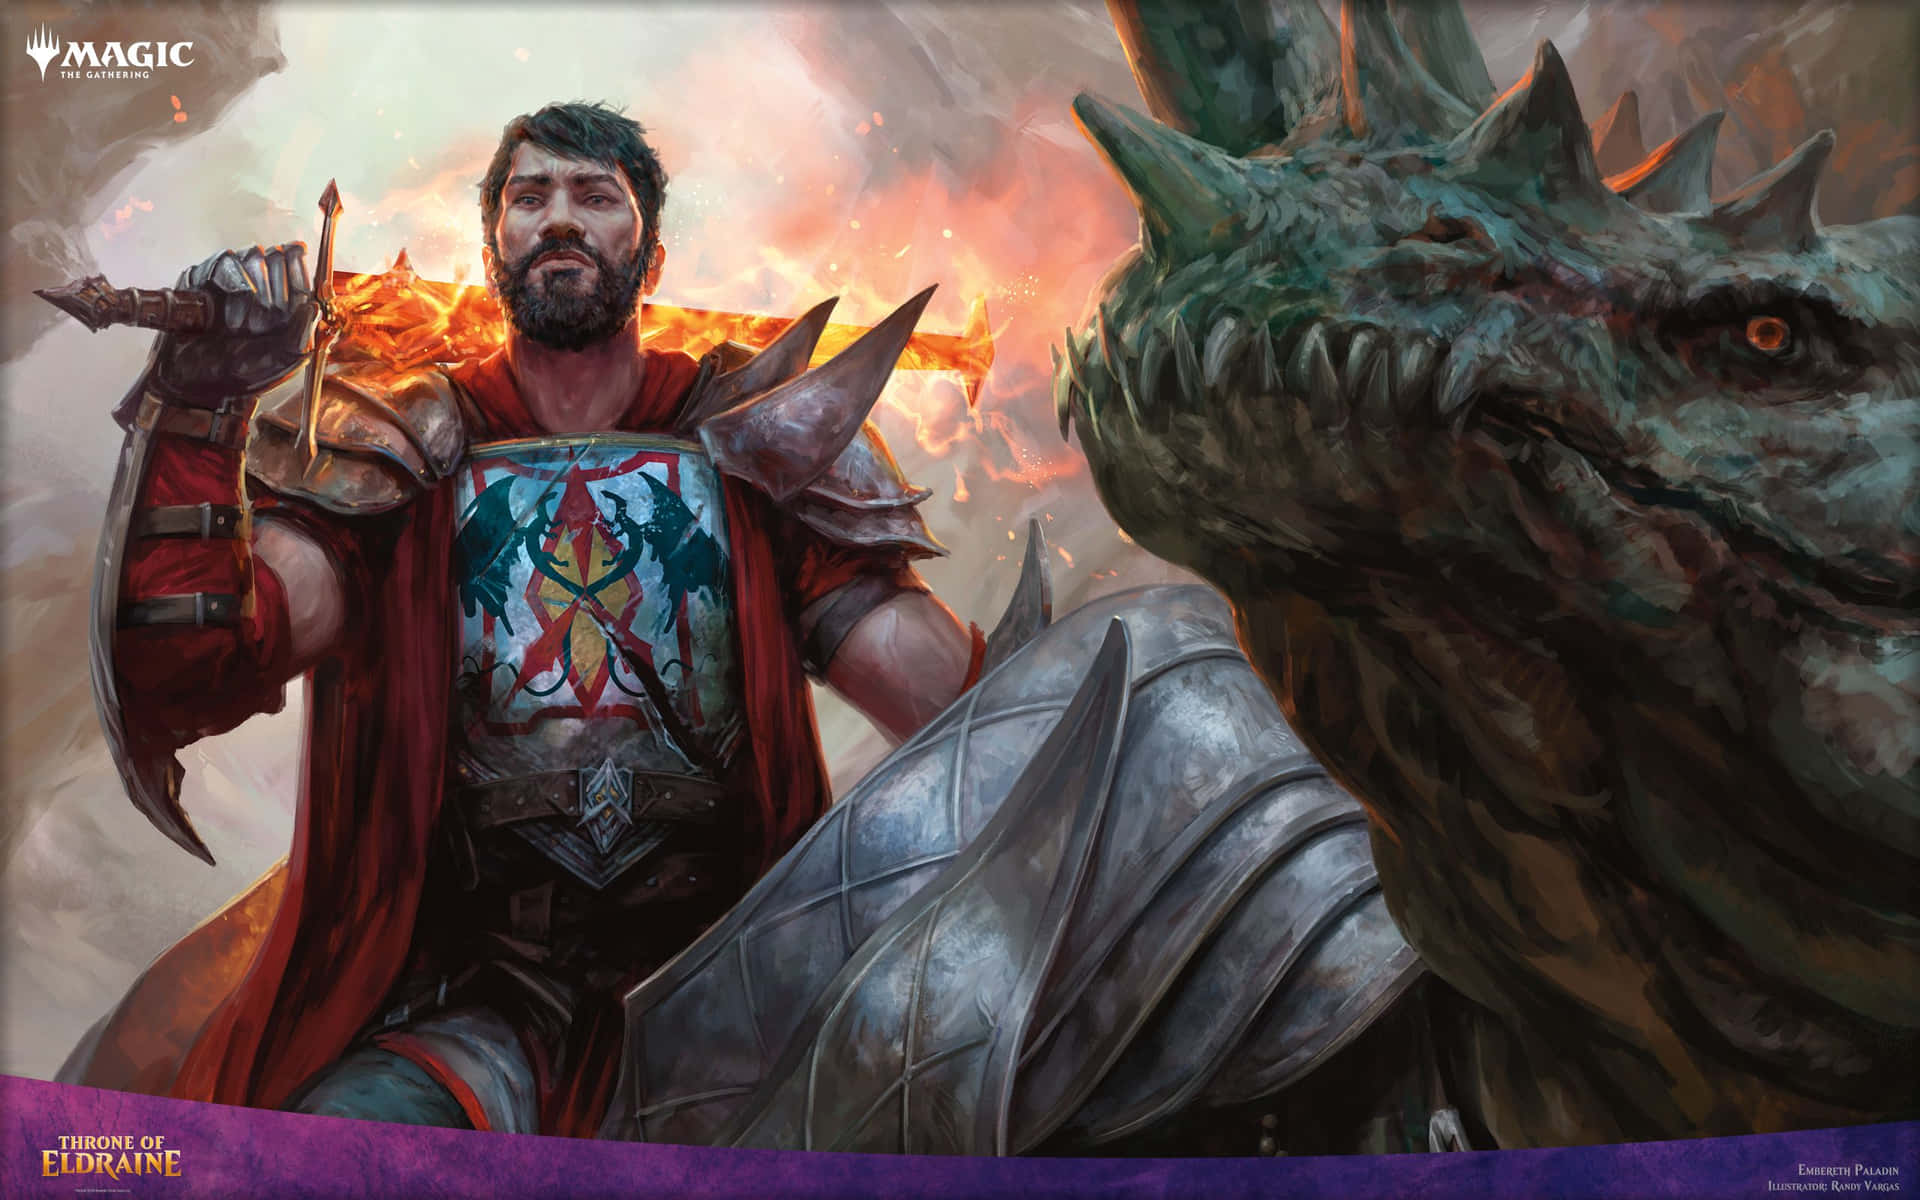 Experience the thrilling battle of Magic The Gathering